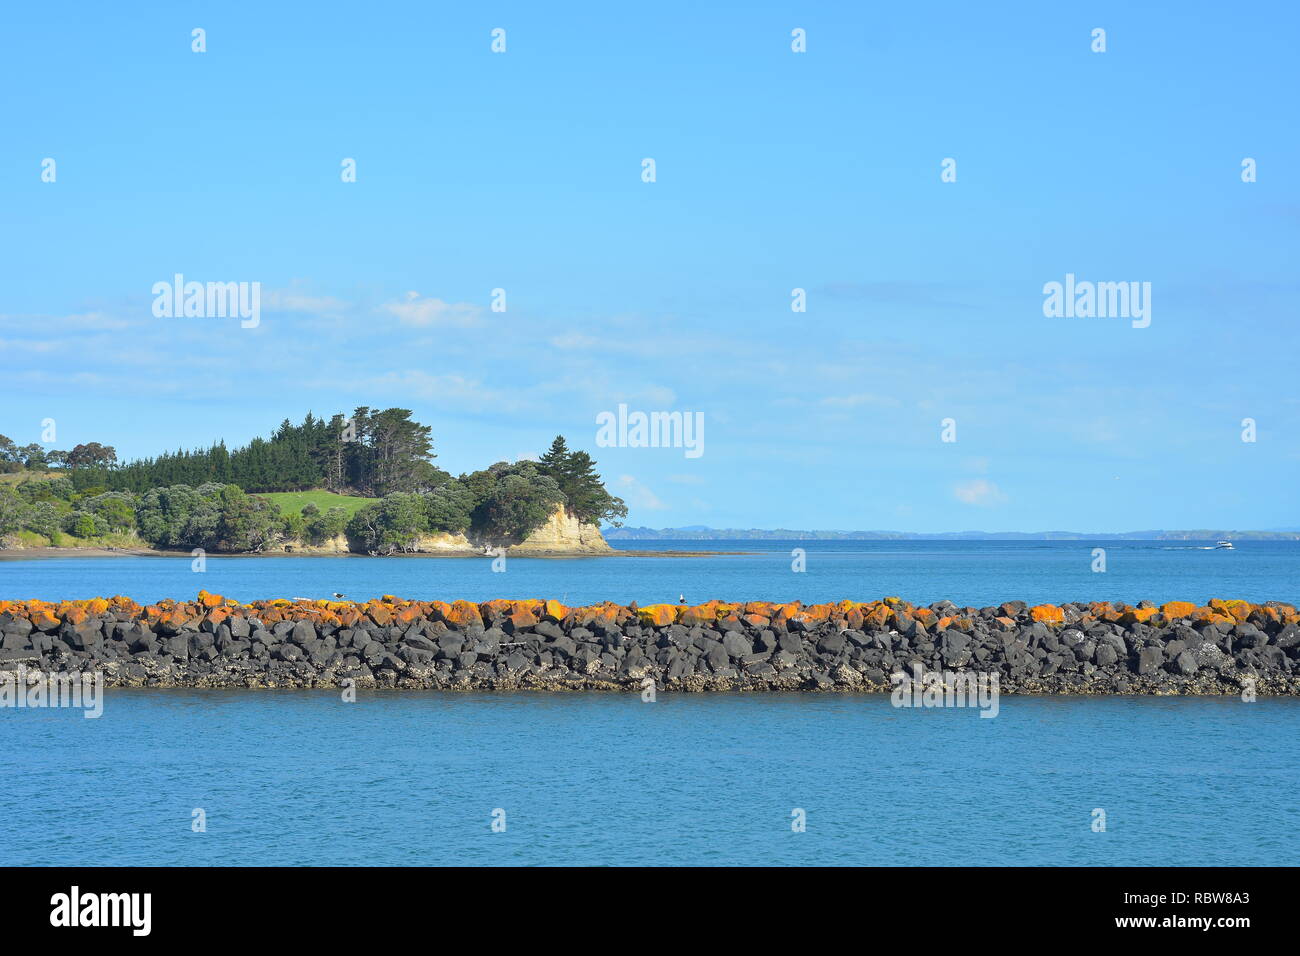 Sea wall made of free laid cut stone in blue sea on sunny day. Note bright yellow lichen growth on top of wall indicating areas where high tide water  Stock Photo